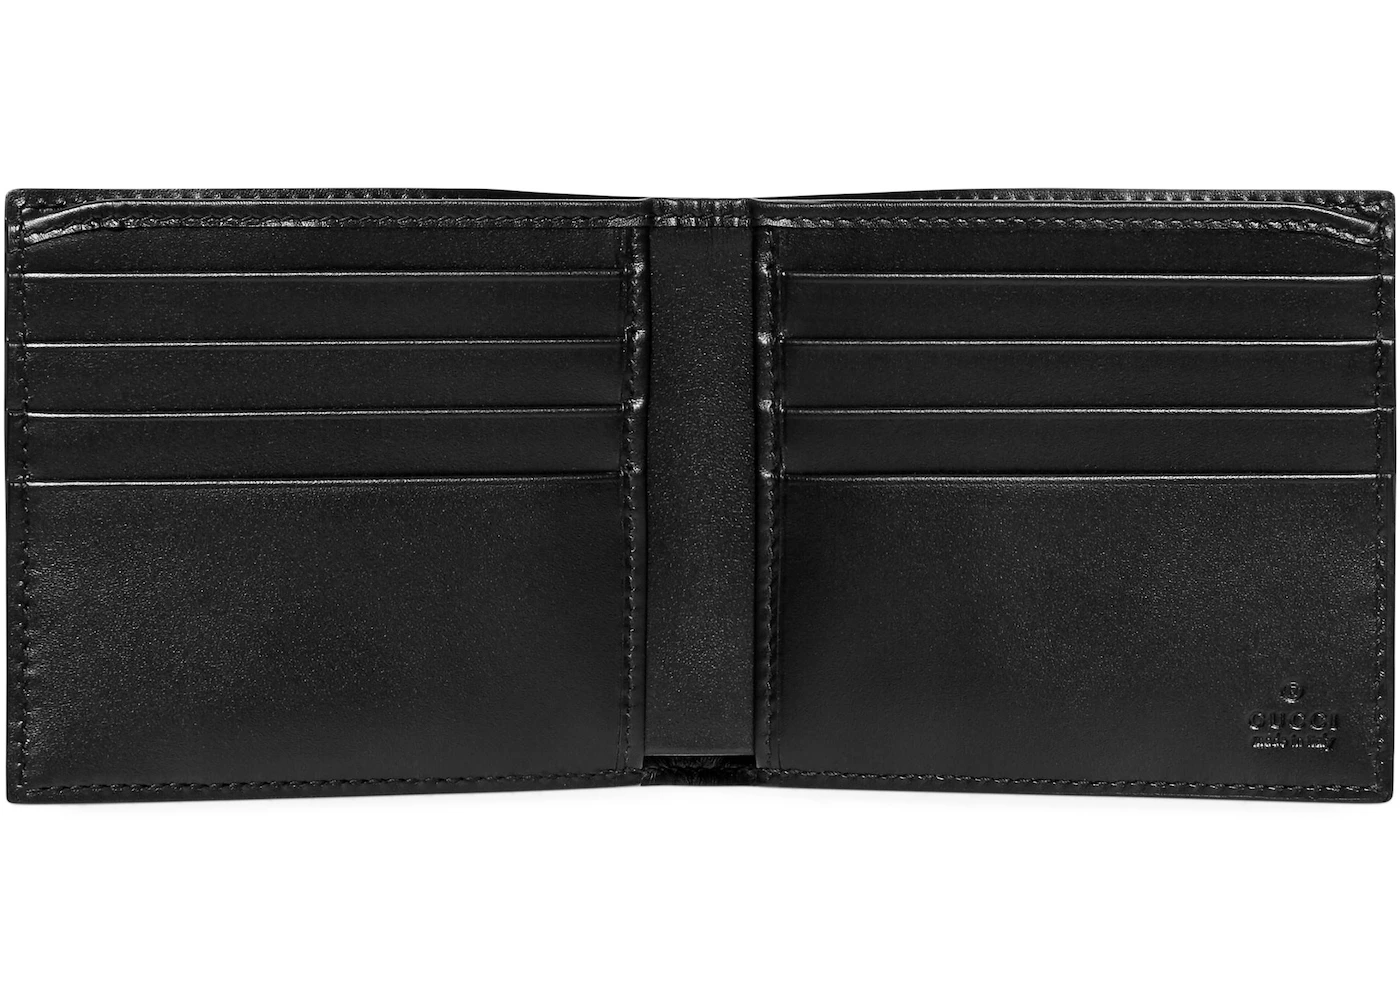 Gucci Bifold Wallet Signature Web (8 Card Slots) Black in Leather - US